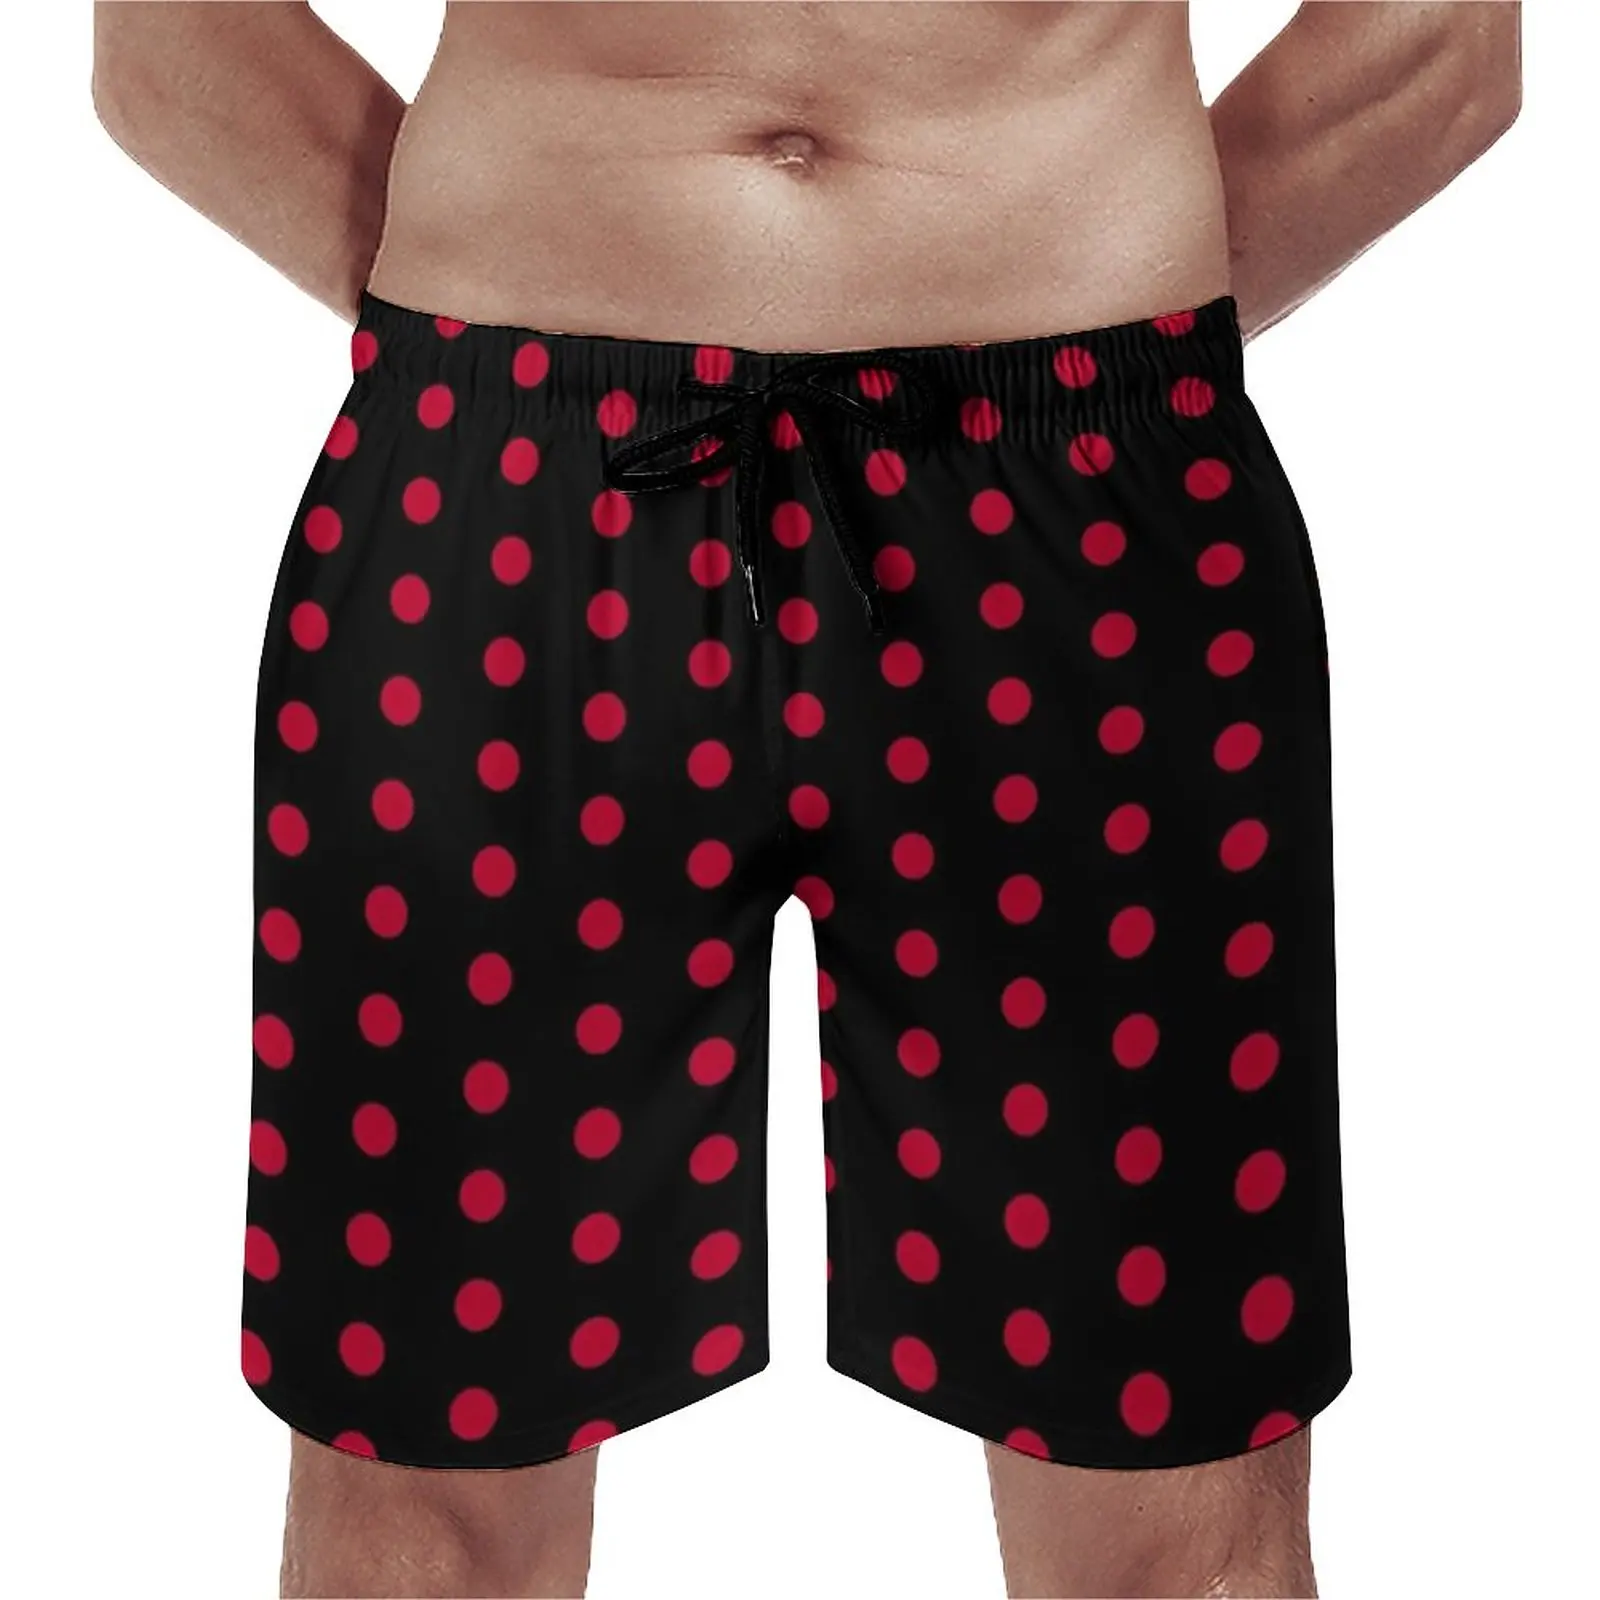 

Black with Red Polka Dot Board Shorts Dotted 70S Vintage Board Short Pants Trenky Man Funny Print Swim Trunks Plus Size